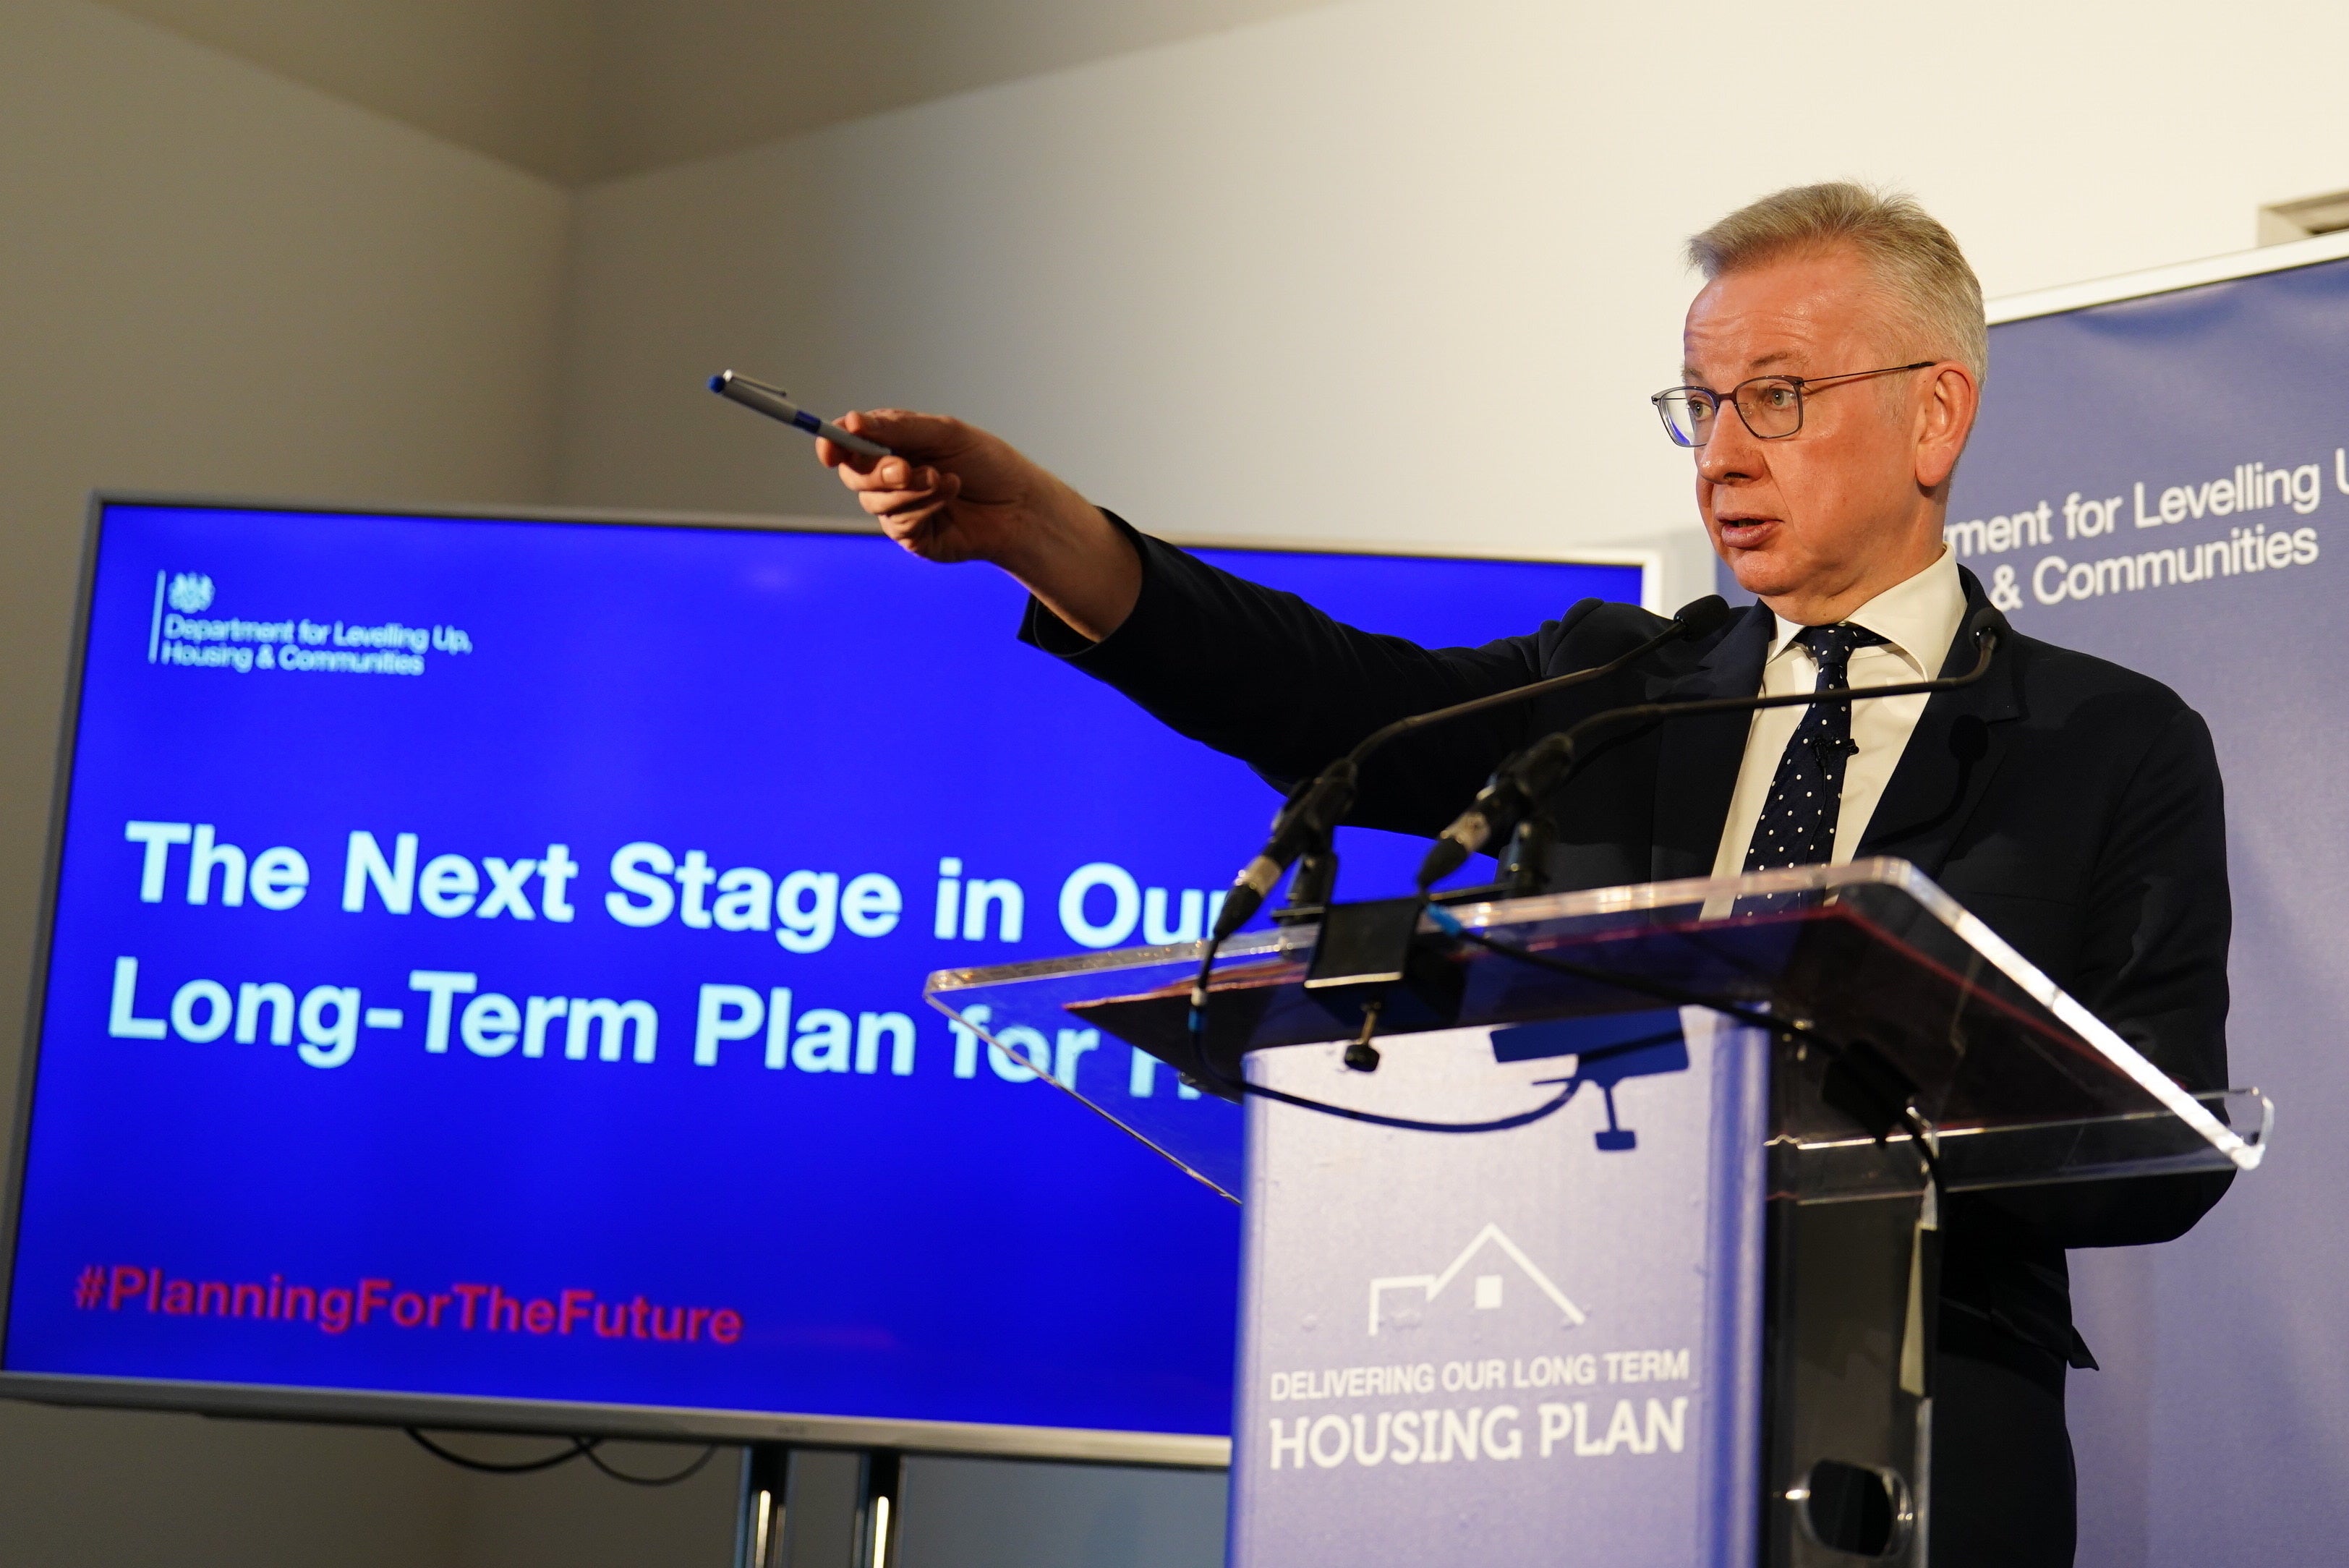 ‘Was it not the Conservative Party that itself reduced local housing targets in the first place?’